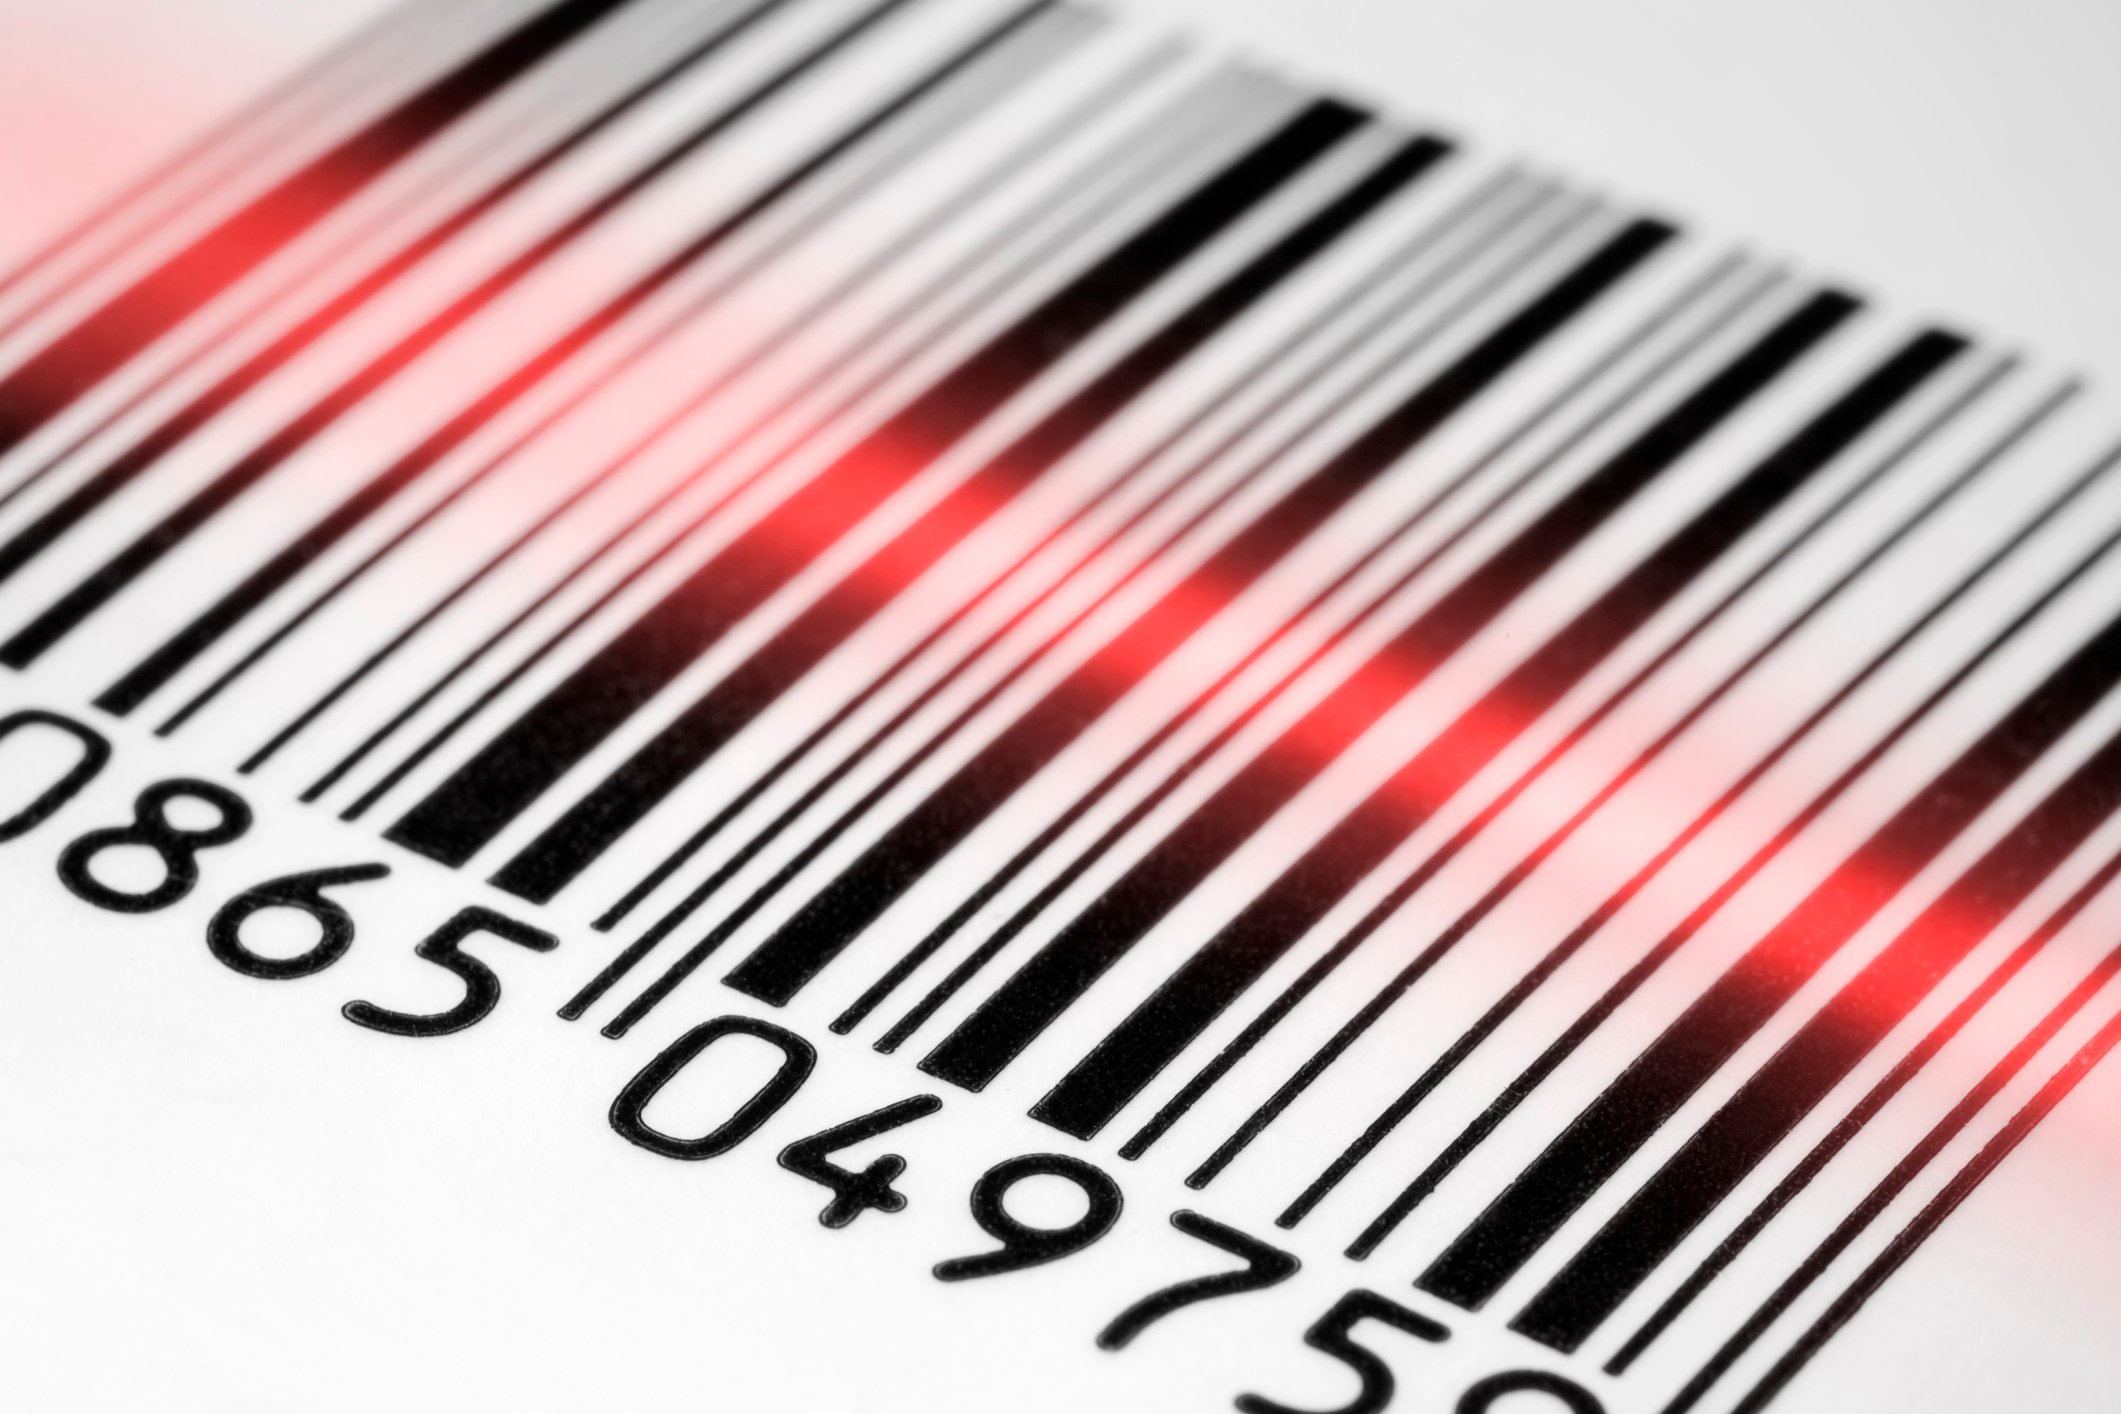 Image of a barcode being scanned